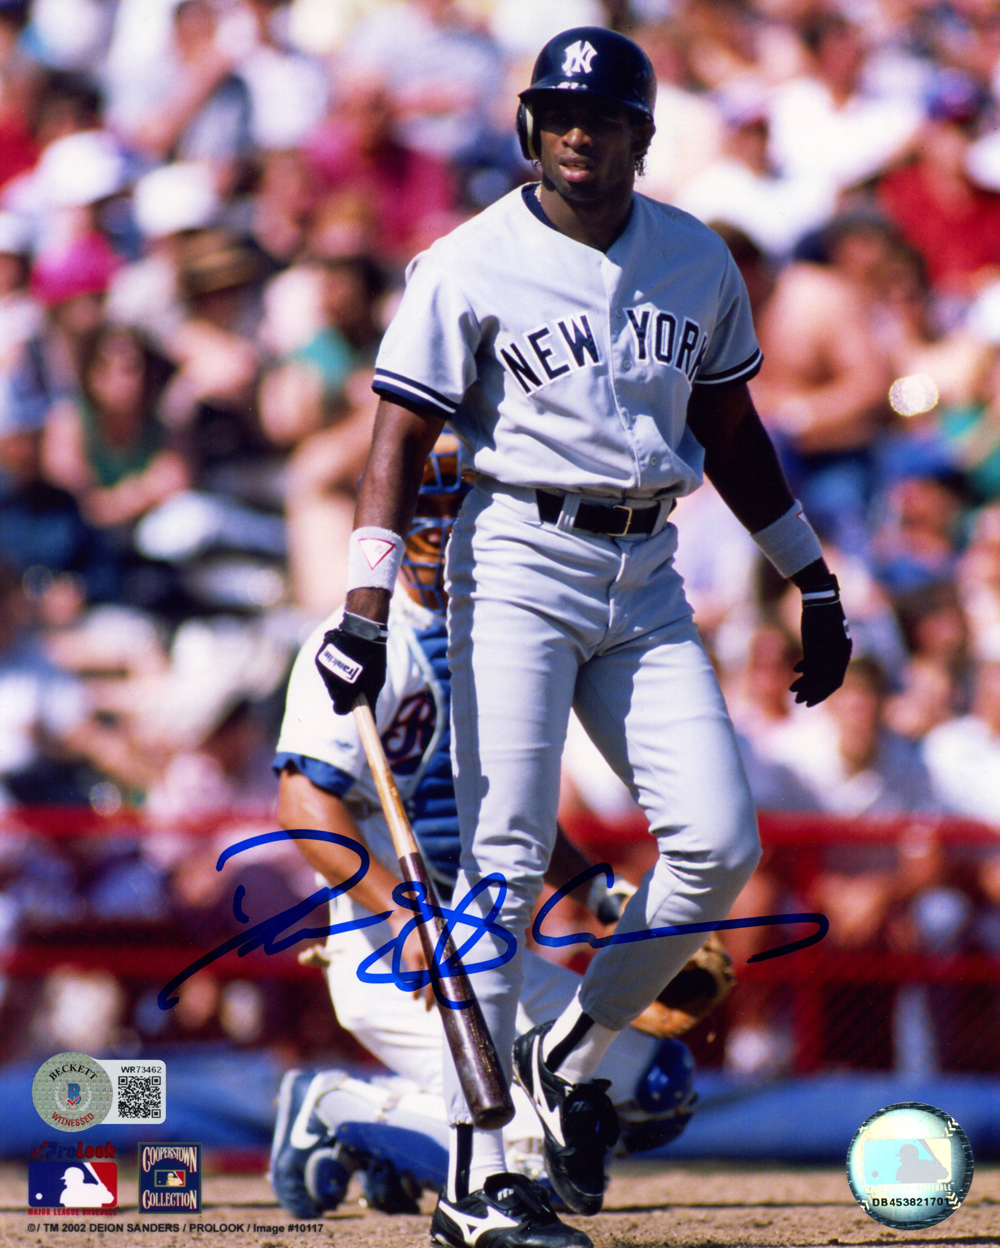 Deion Sanders Autographed/Signed New York Yankees 8x10 Photo Beckett